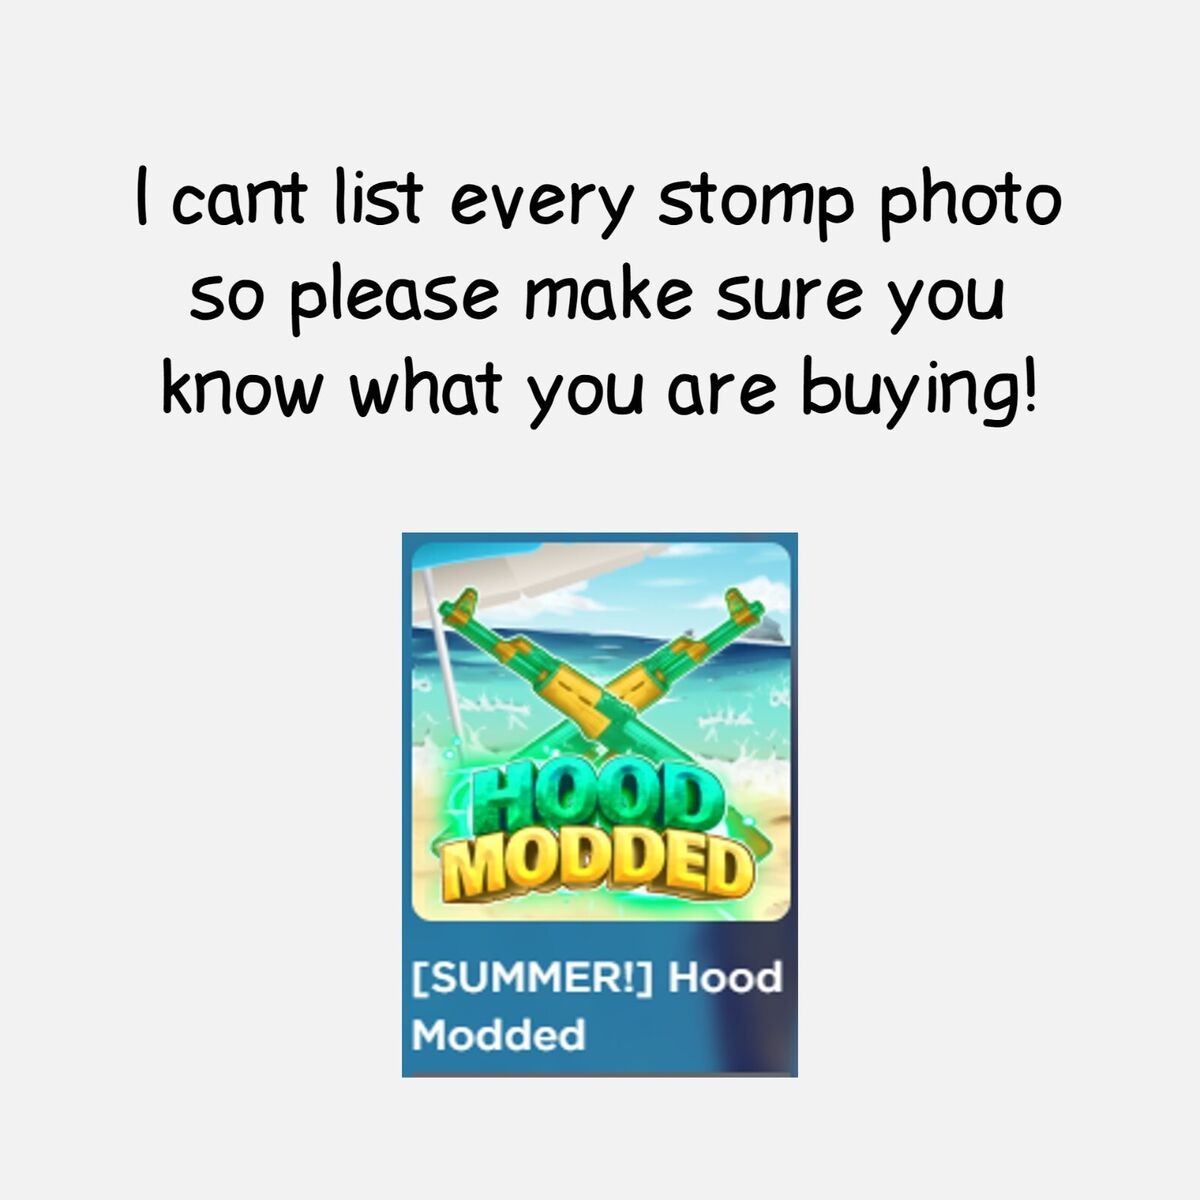 dragon restock) Roblox dahood modded stomps- Cheapest Available